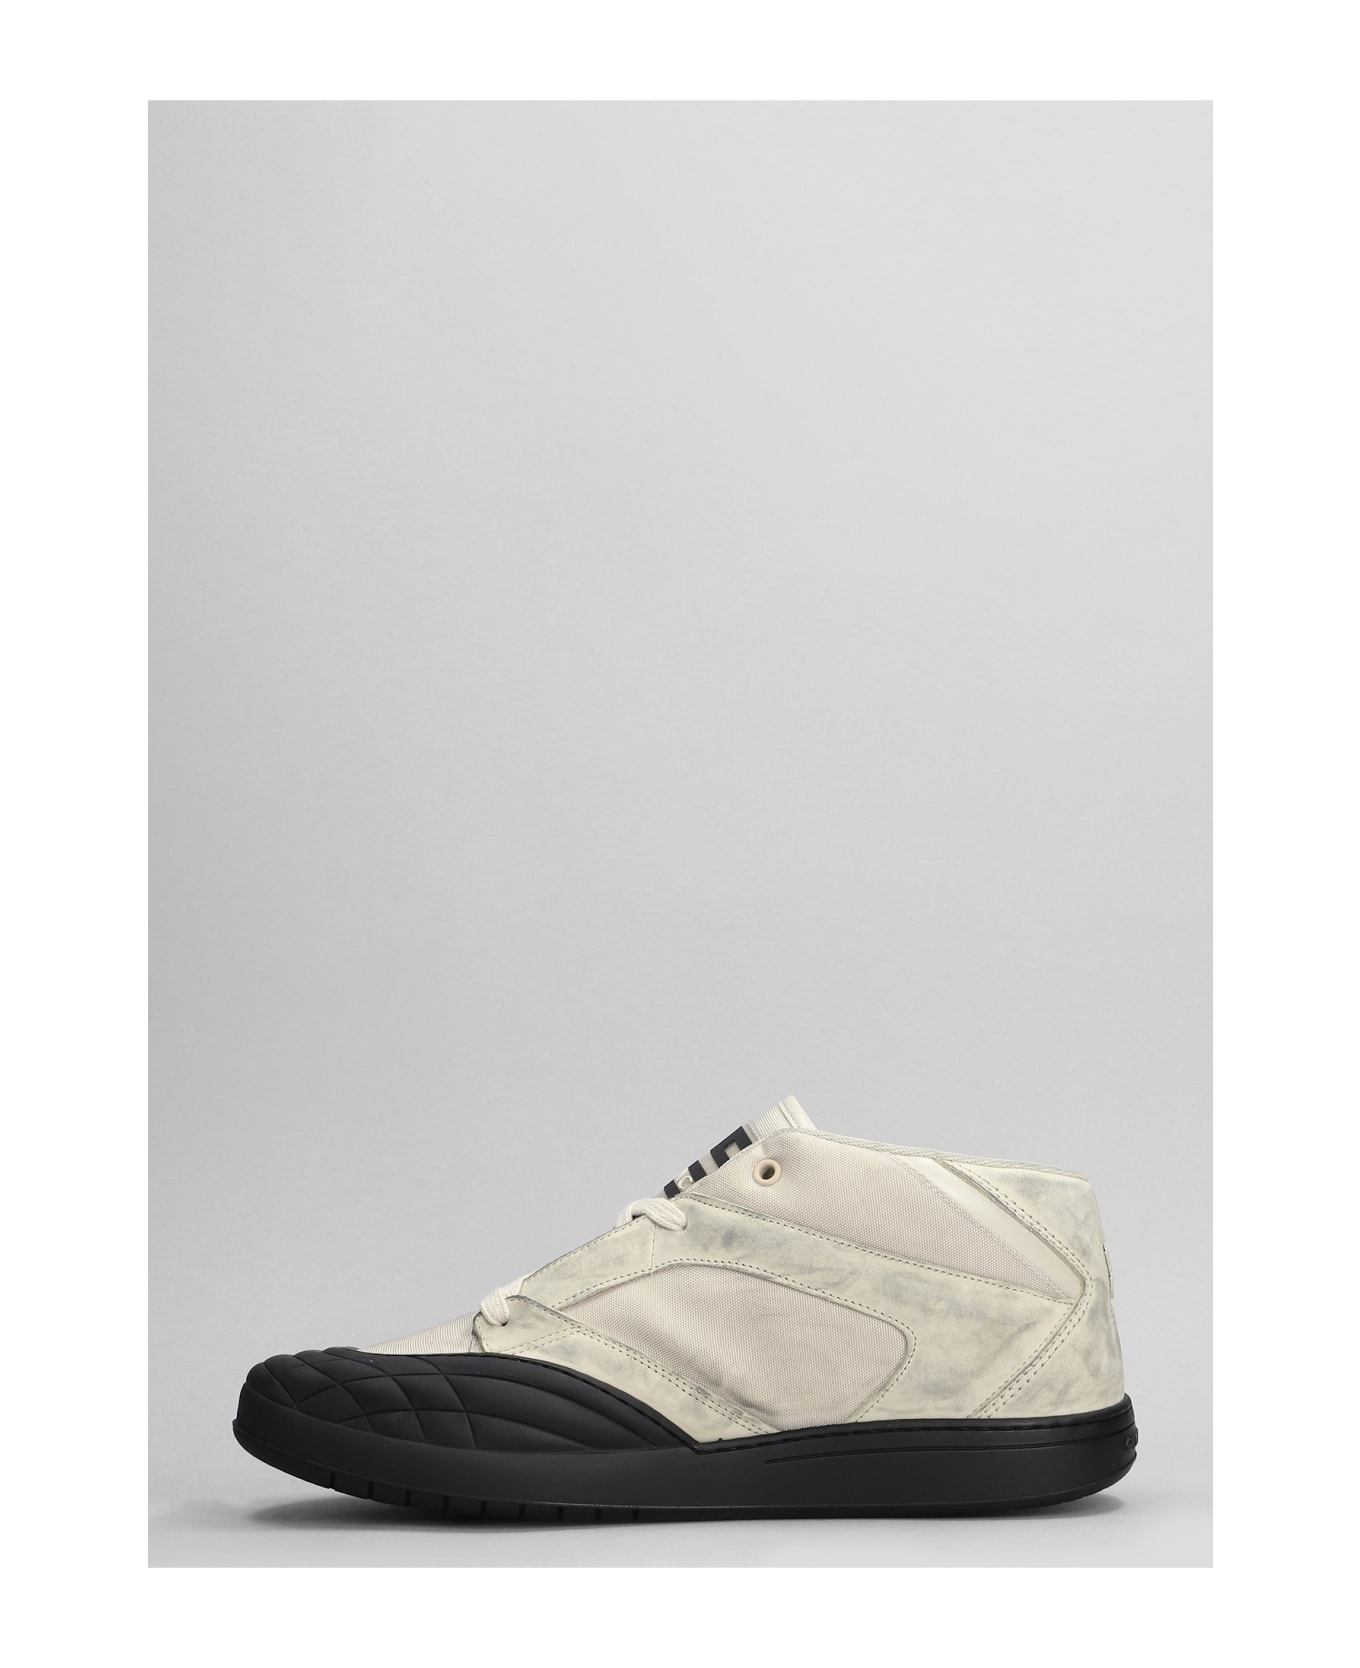 Givenchy Sneakers In Beige Leather - beige